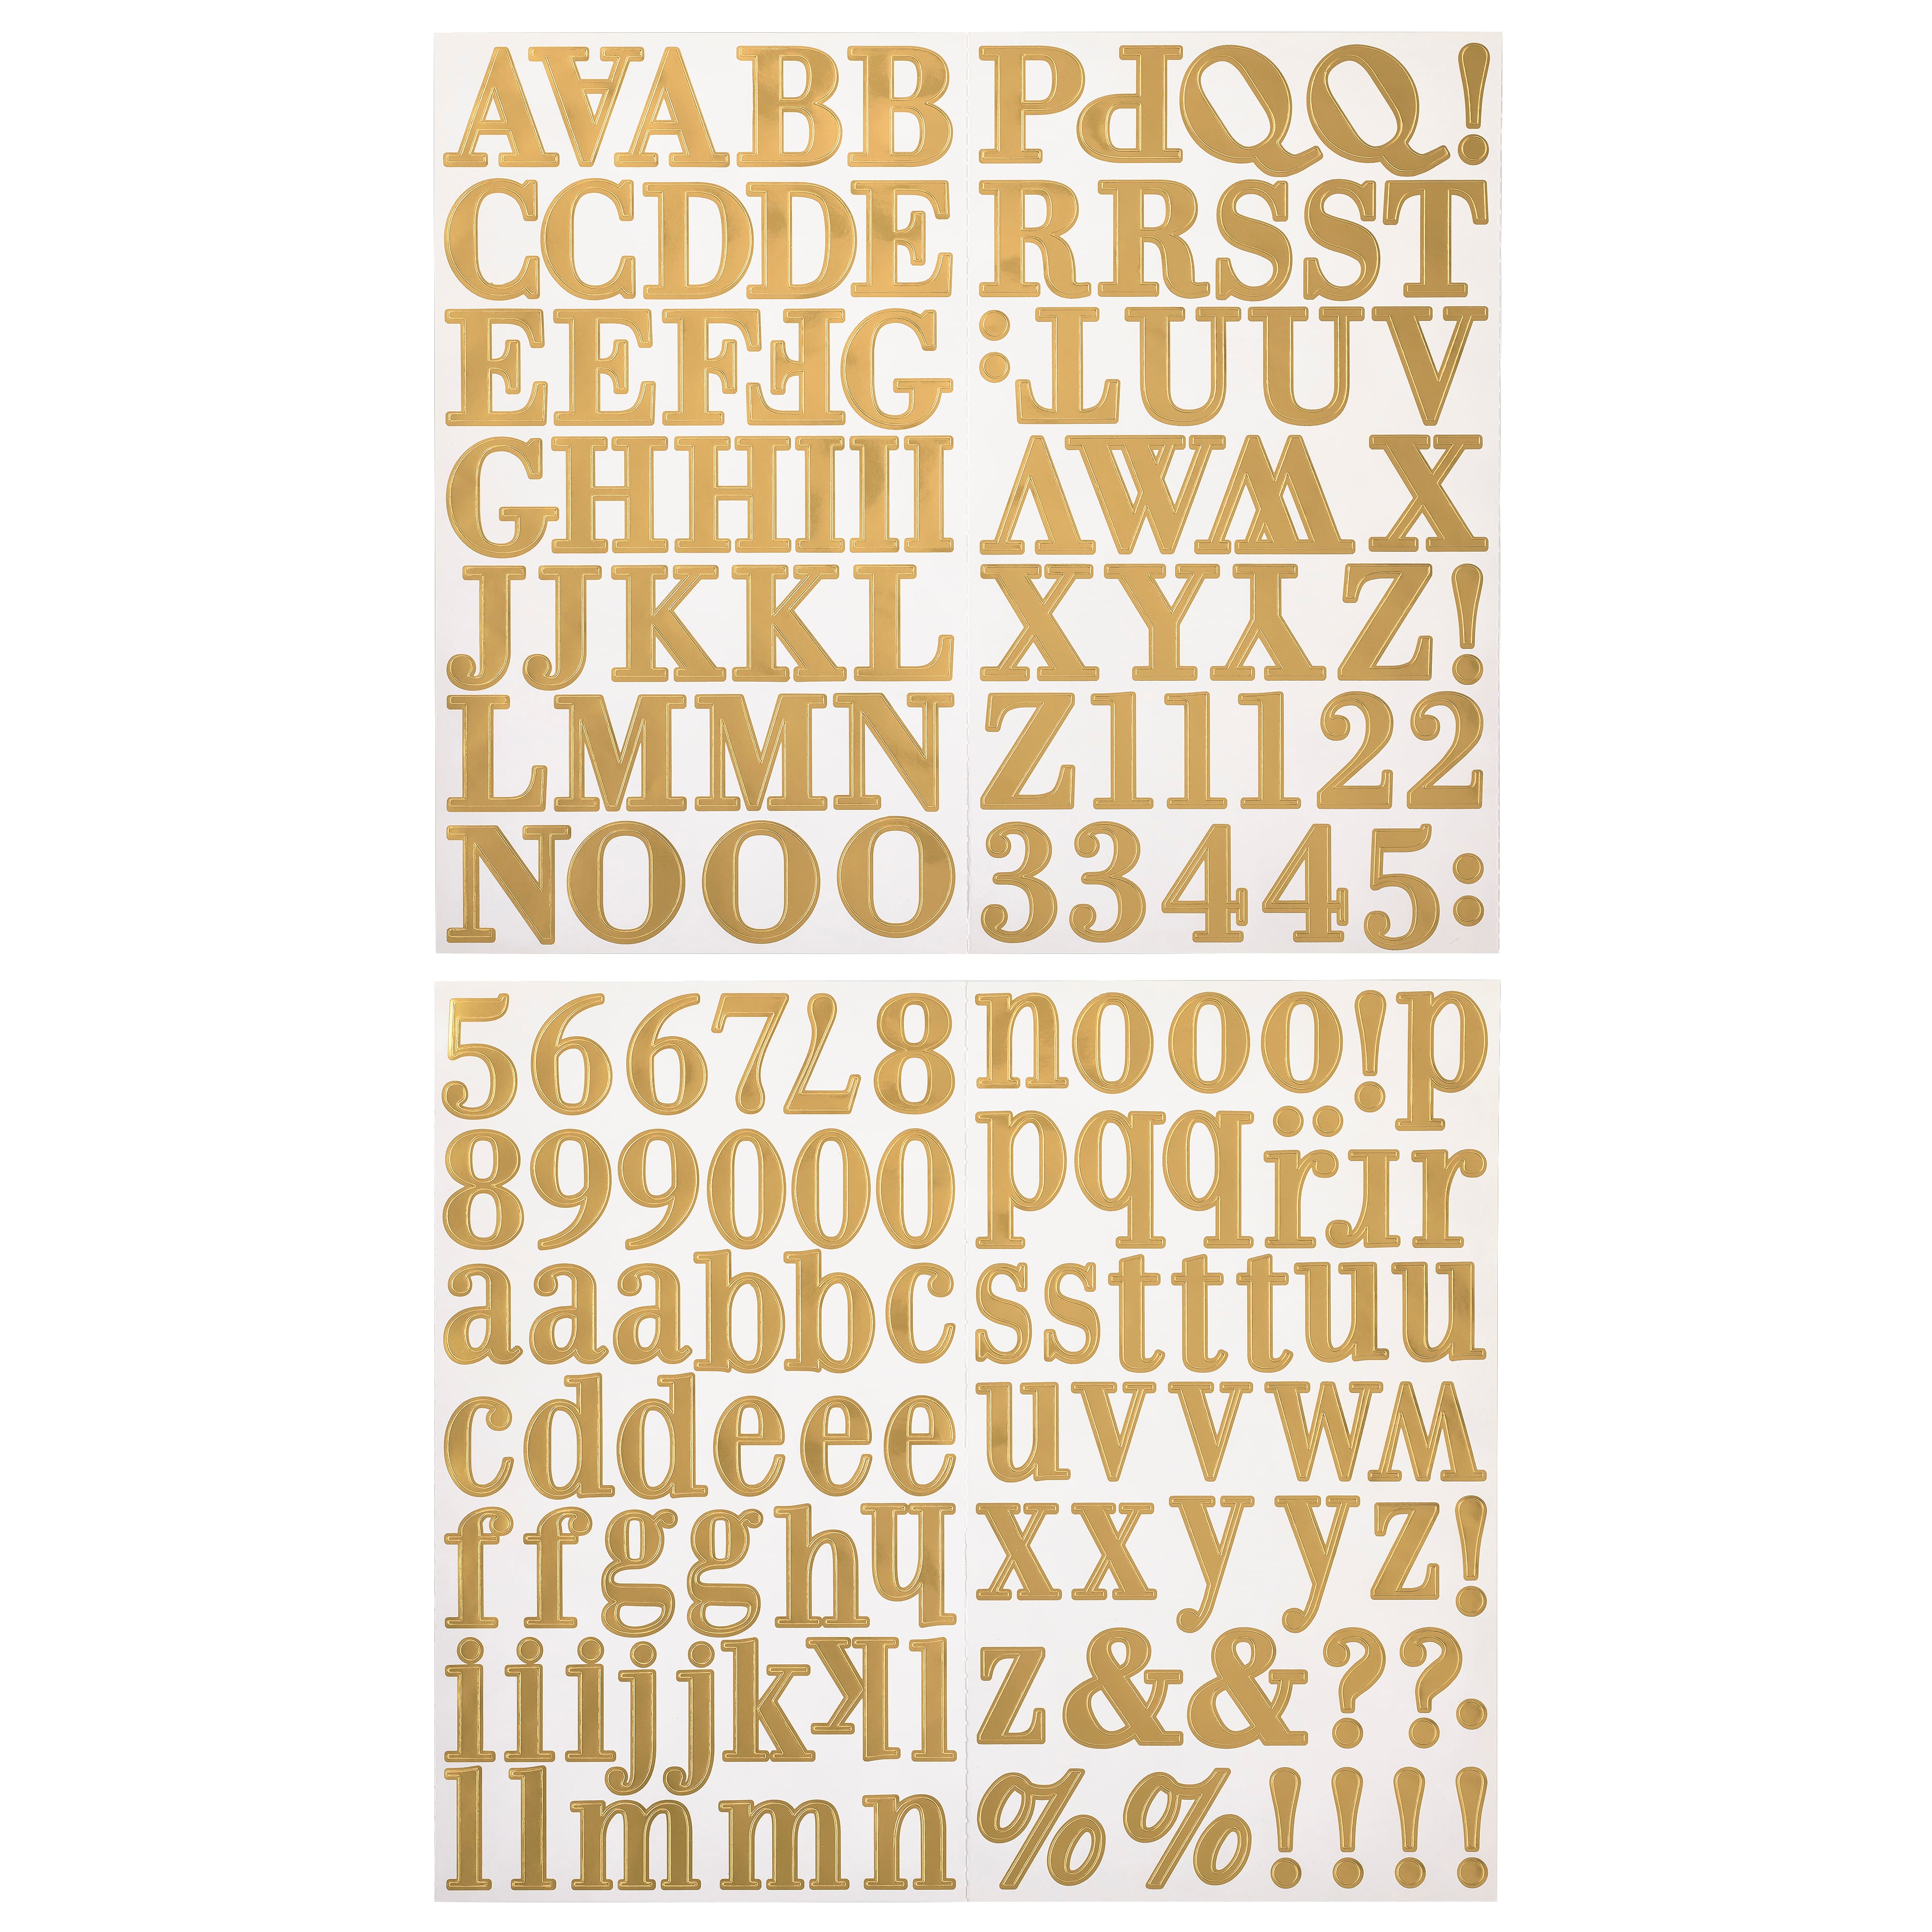 Silver Glitter Large Alphabet Stickers by Recollections